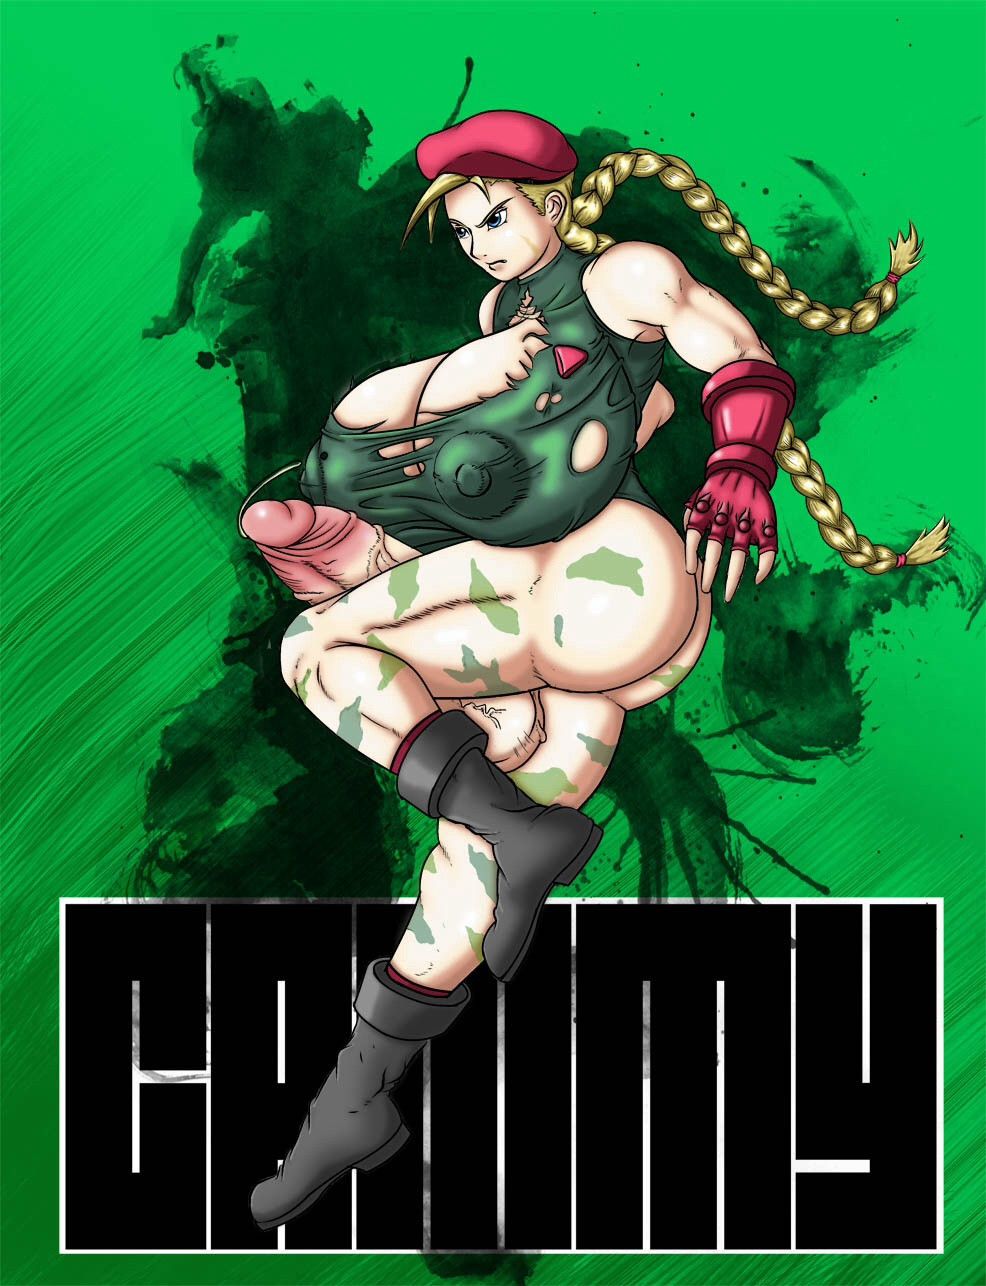 cammy wit Anime shemale